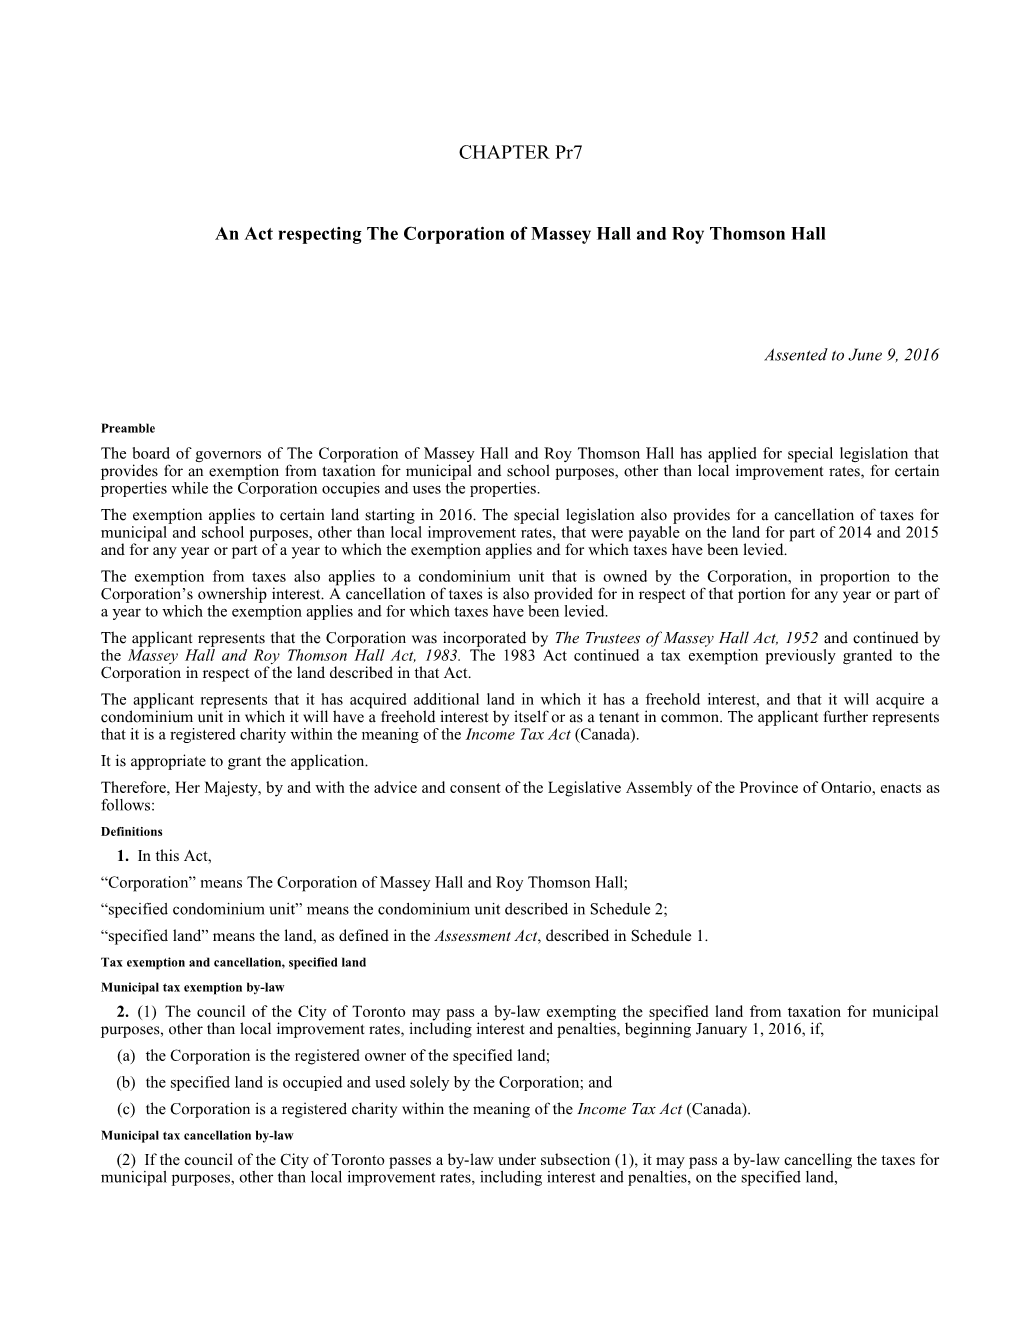 Corporation of Massey Hall and Roy Thomson Hall Act (Tax Relief), 2016, S.O. 2016, C. Pr7